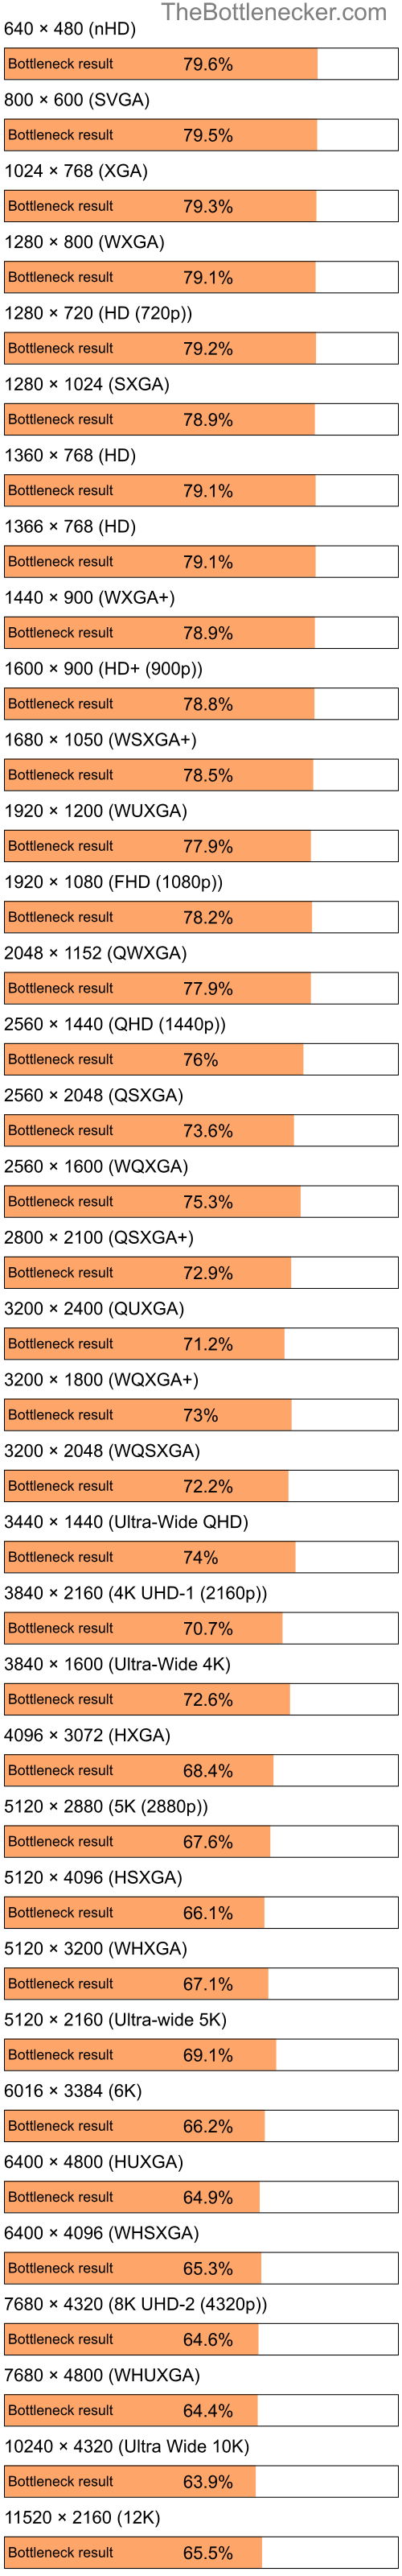 Bottleneck results by resolution for AMD Phenom II X4 973 and NVIDIA GeForce RTX 4090 in General Tasks